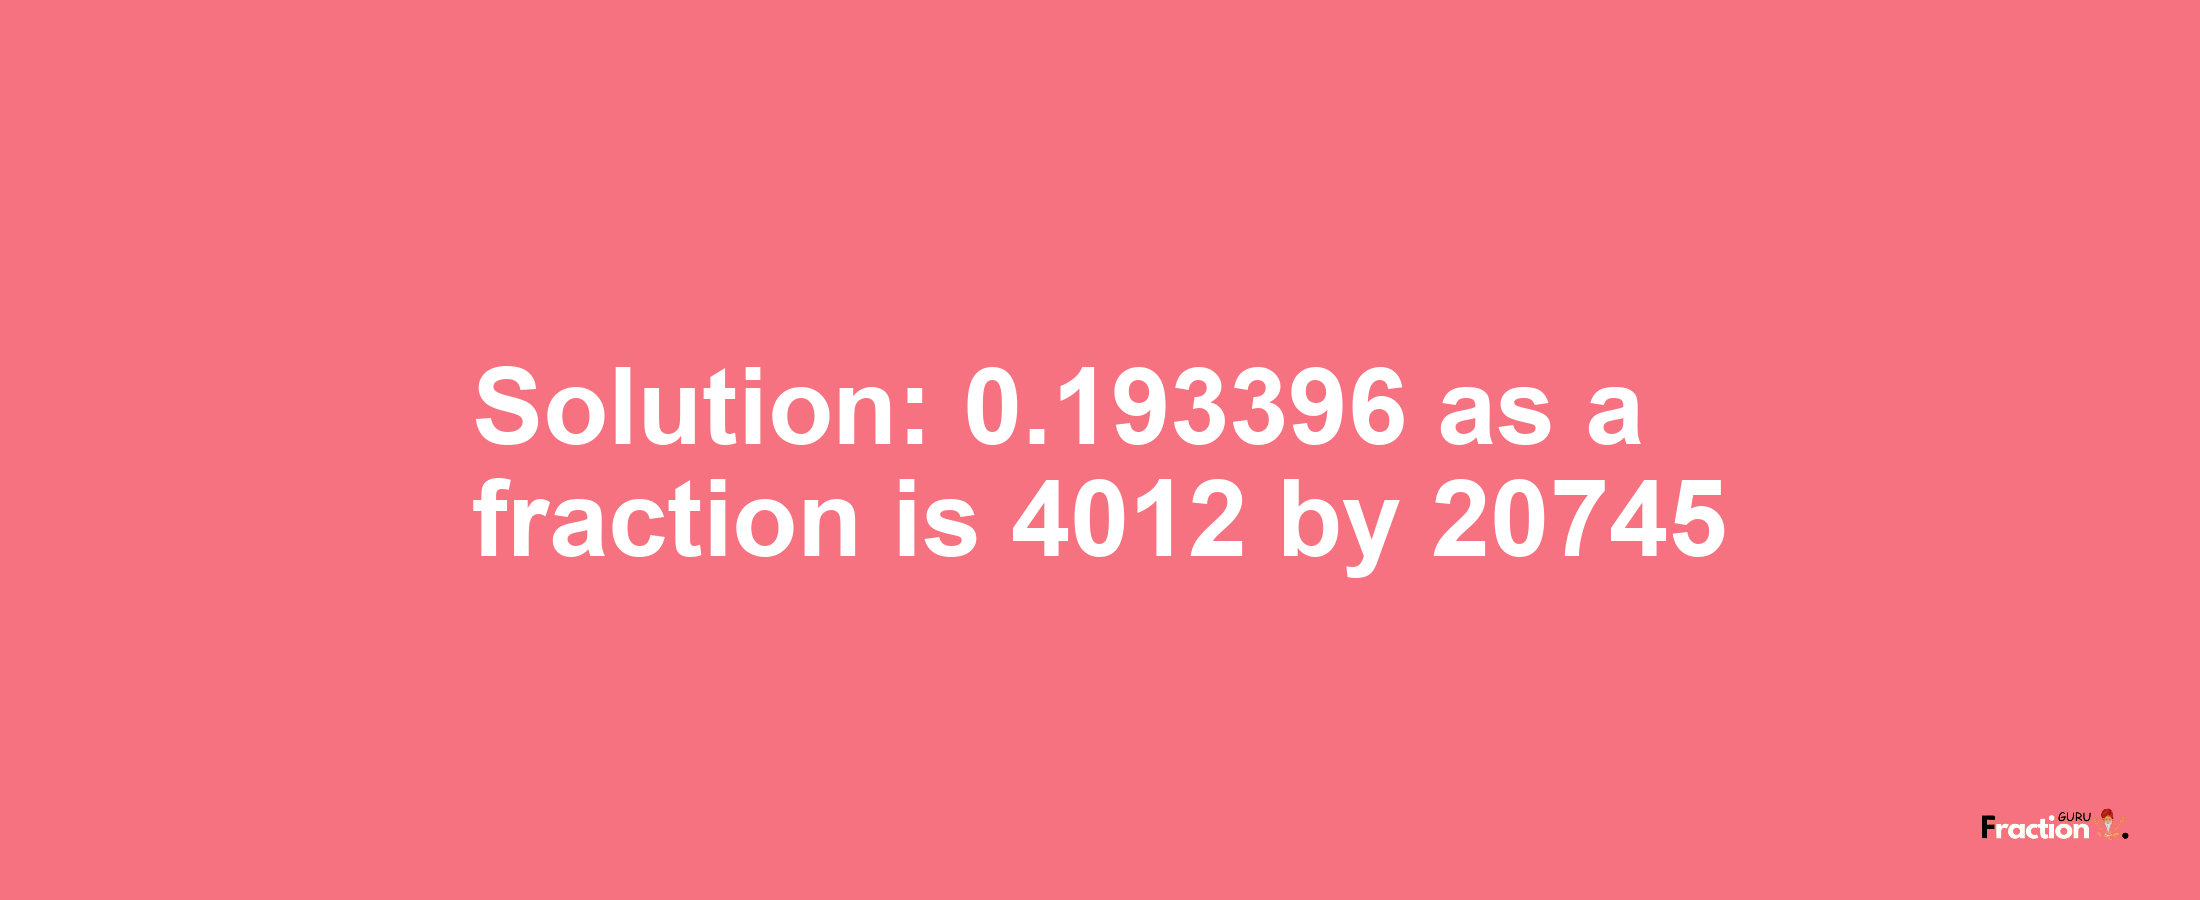 Solution:0.193396 as a fraction is 4012/20745